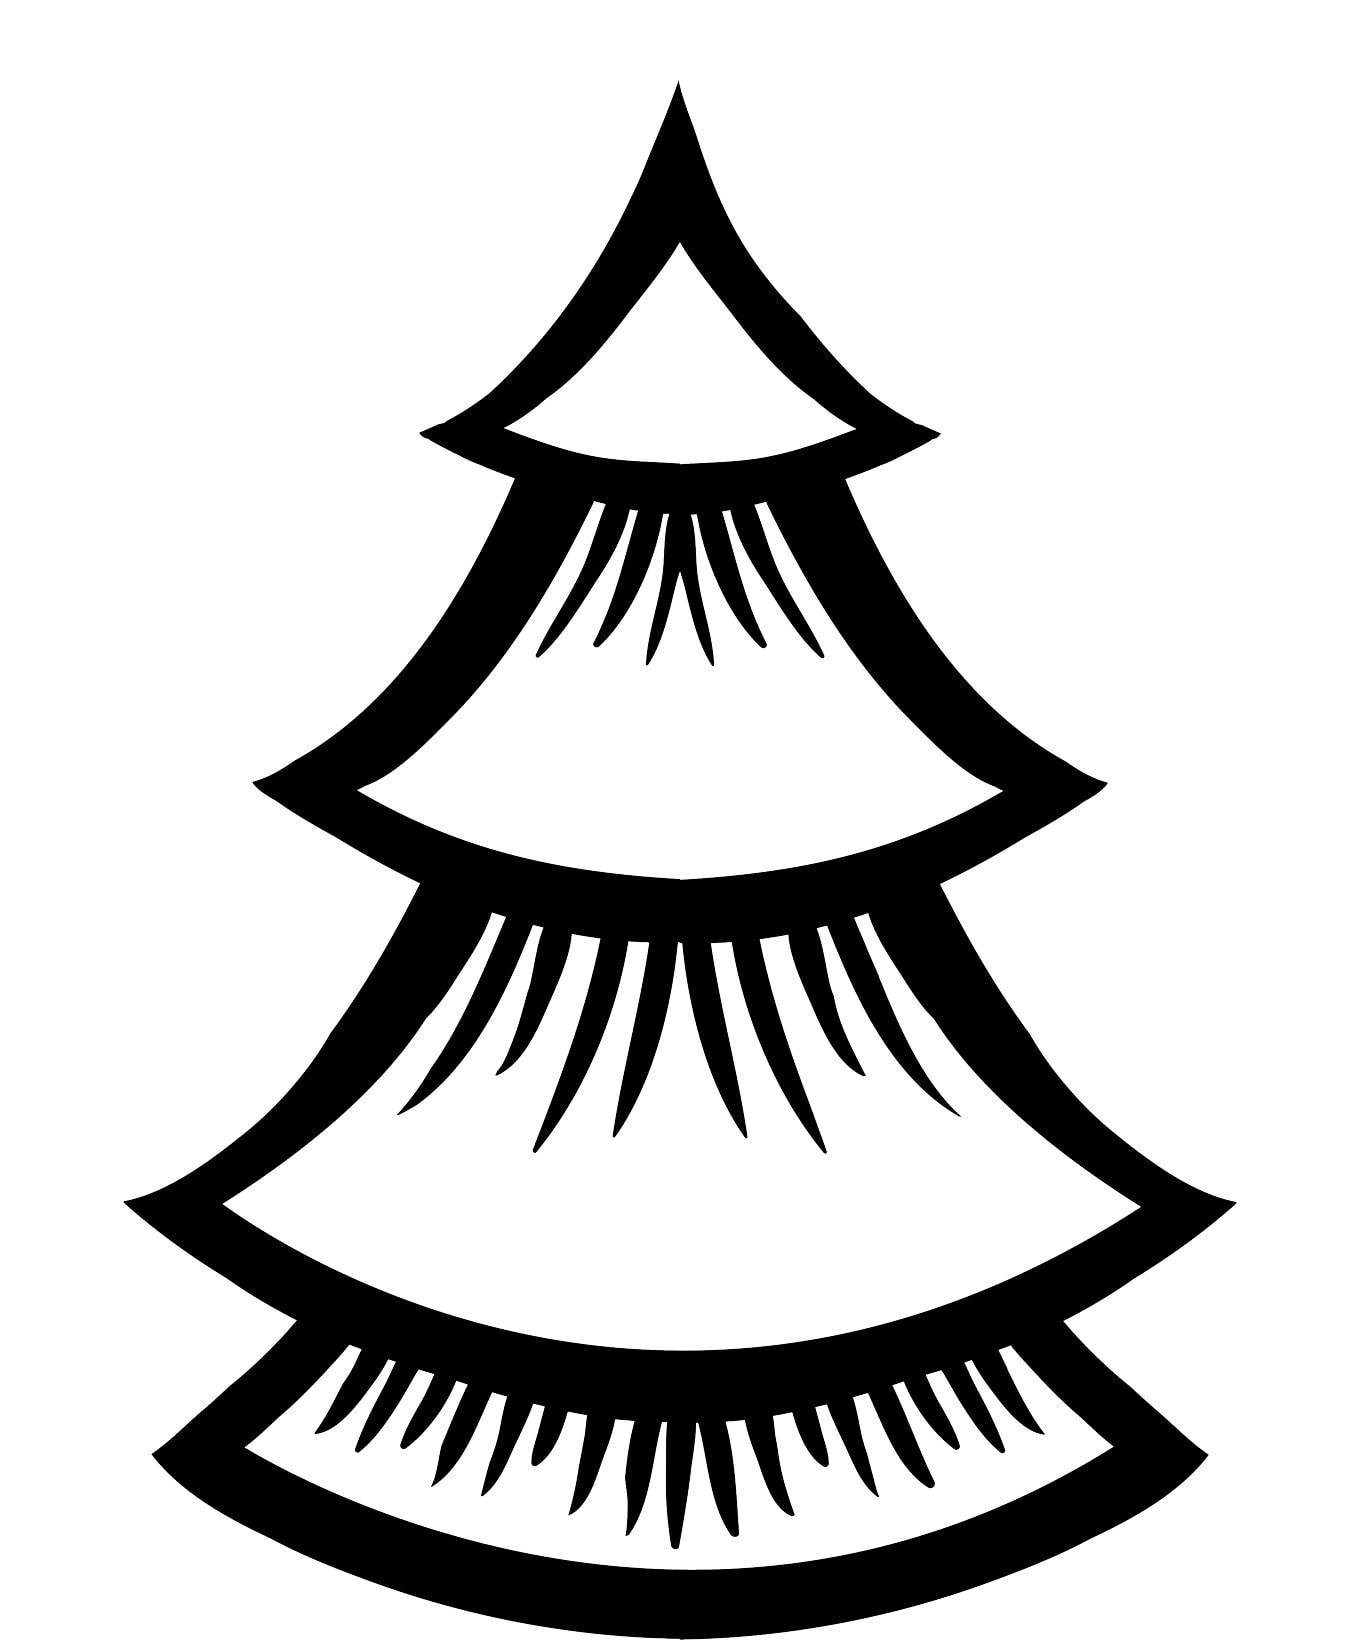 Simple And Basic Christmas Tree Design Coloring Page